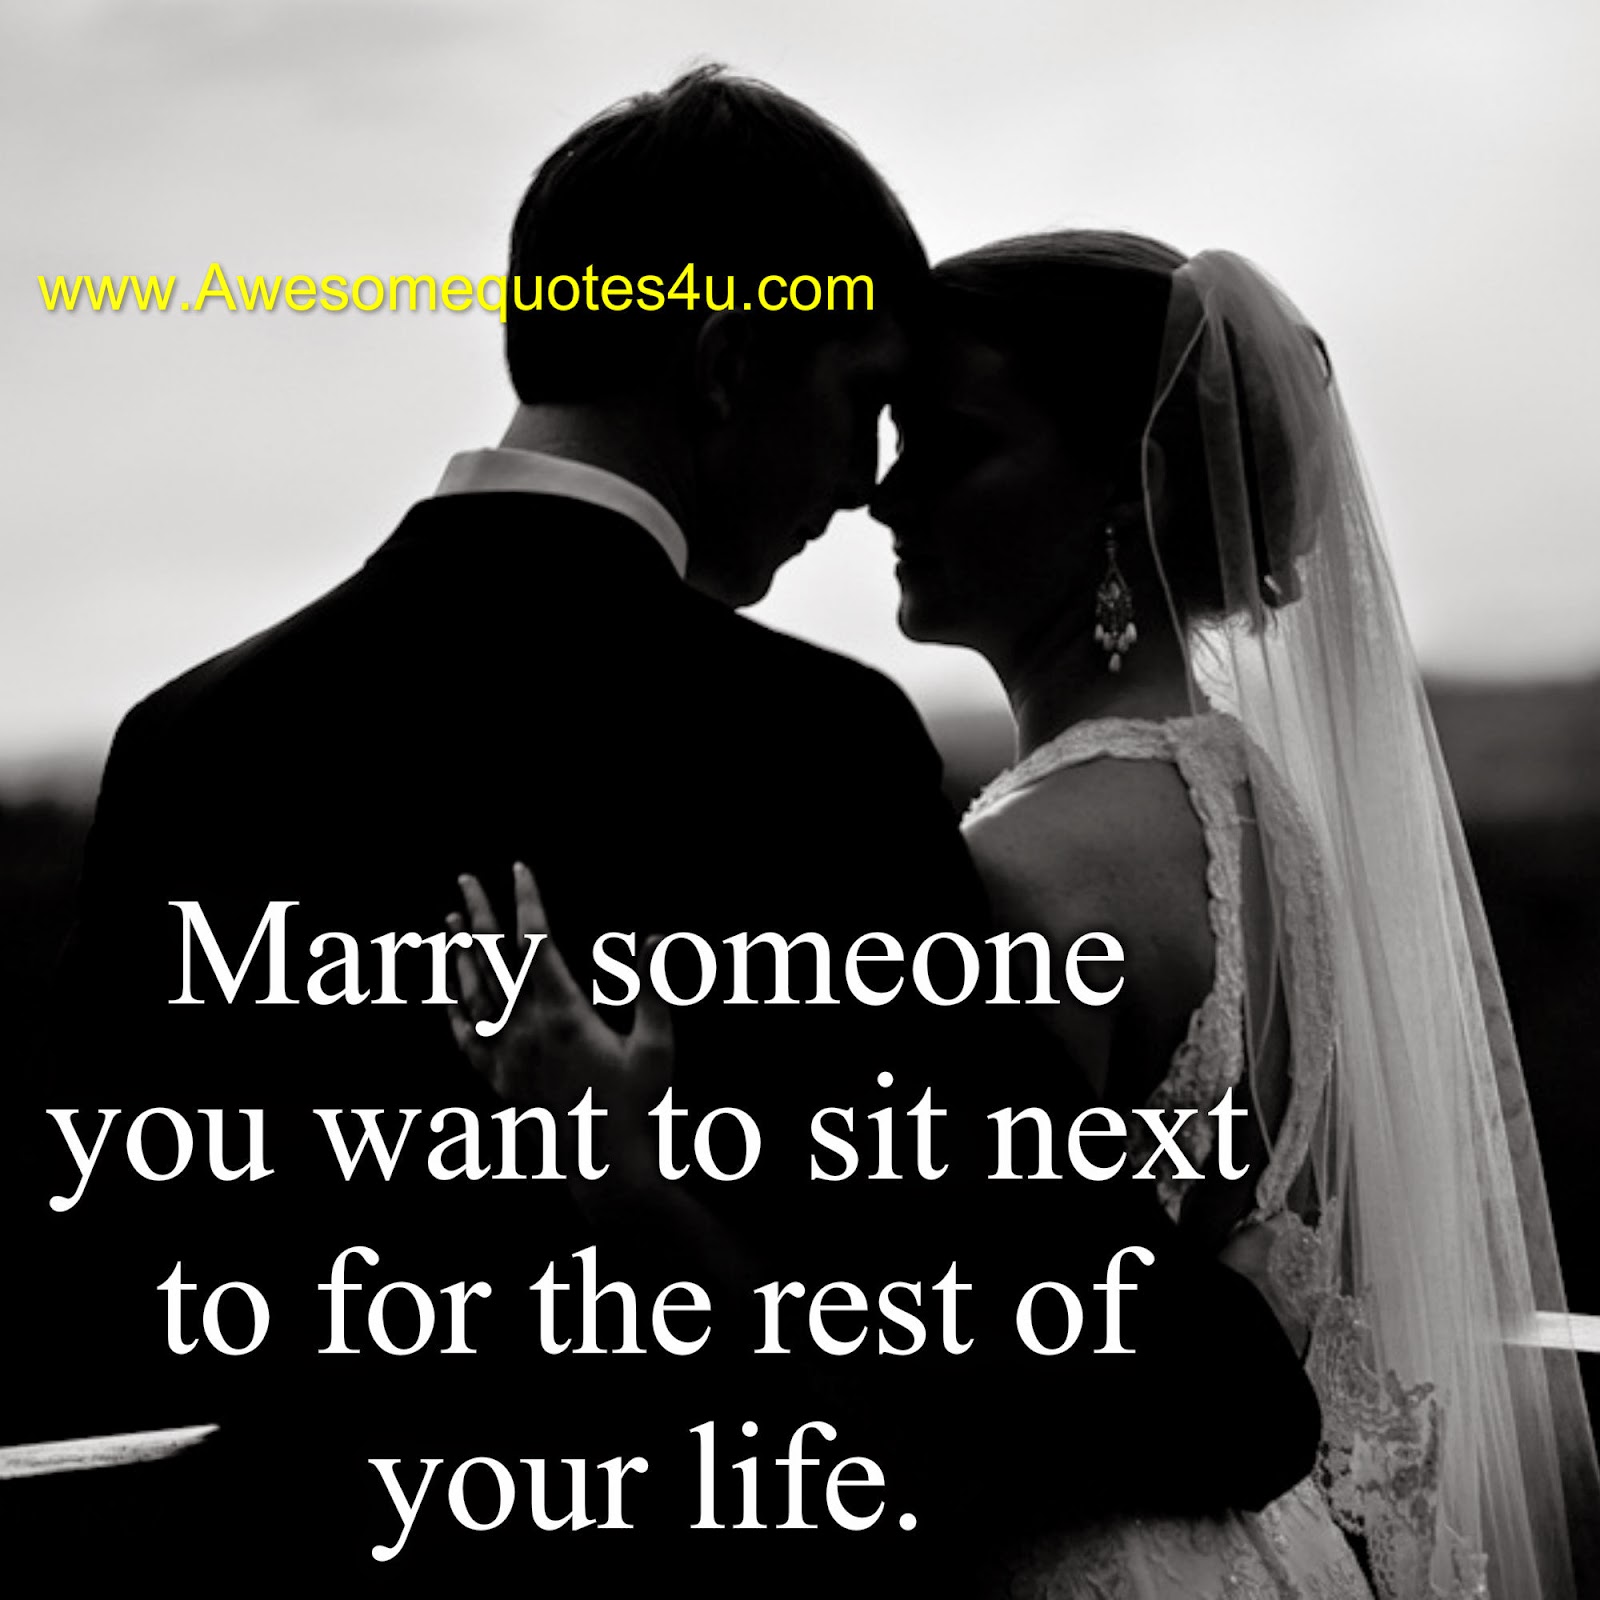 Awesome Quotes Whom to get married?